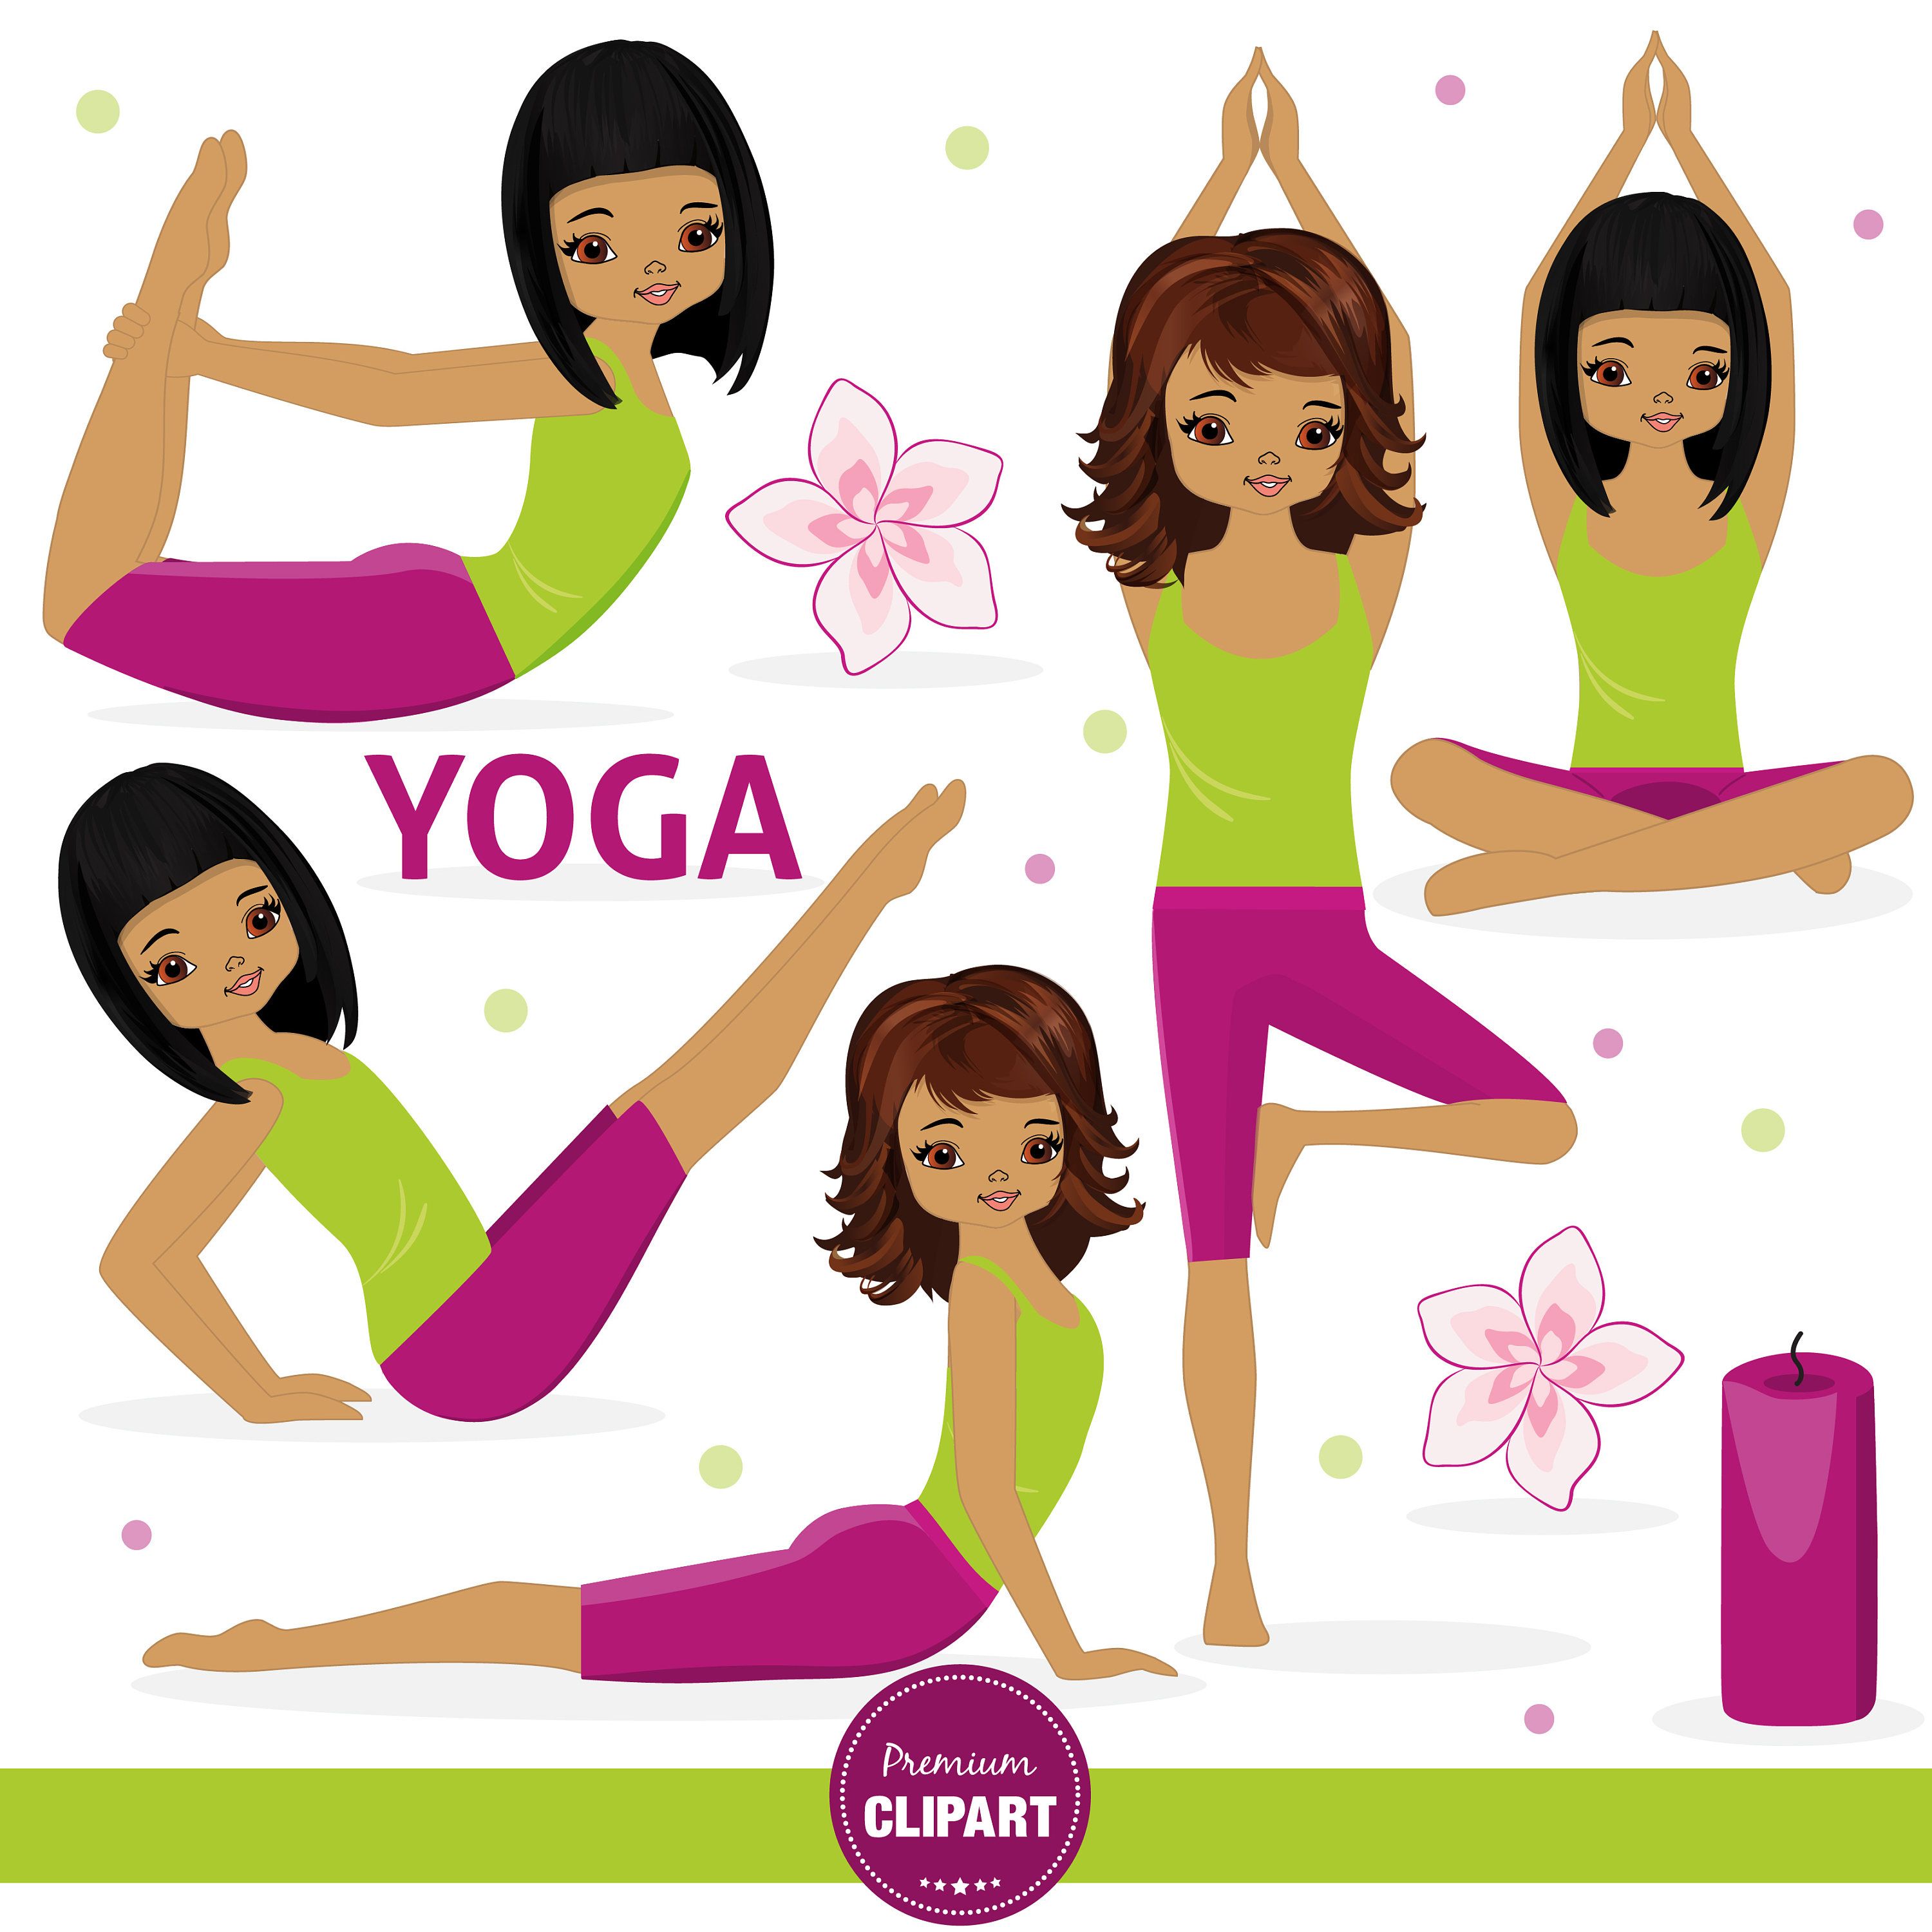 African American Yoga clipart, Yoga images, Girl clipart